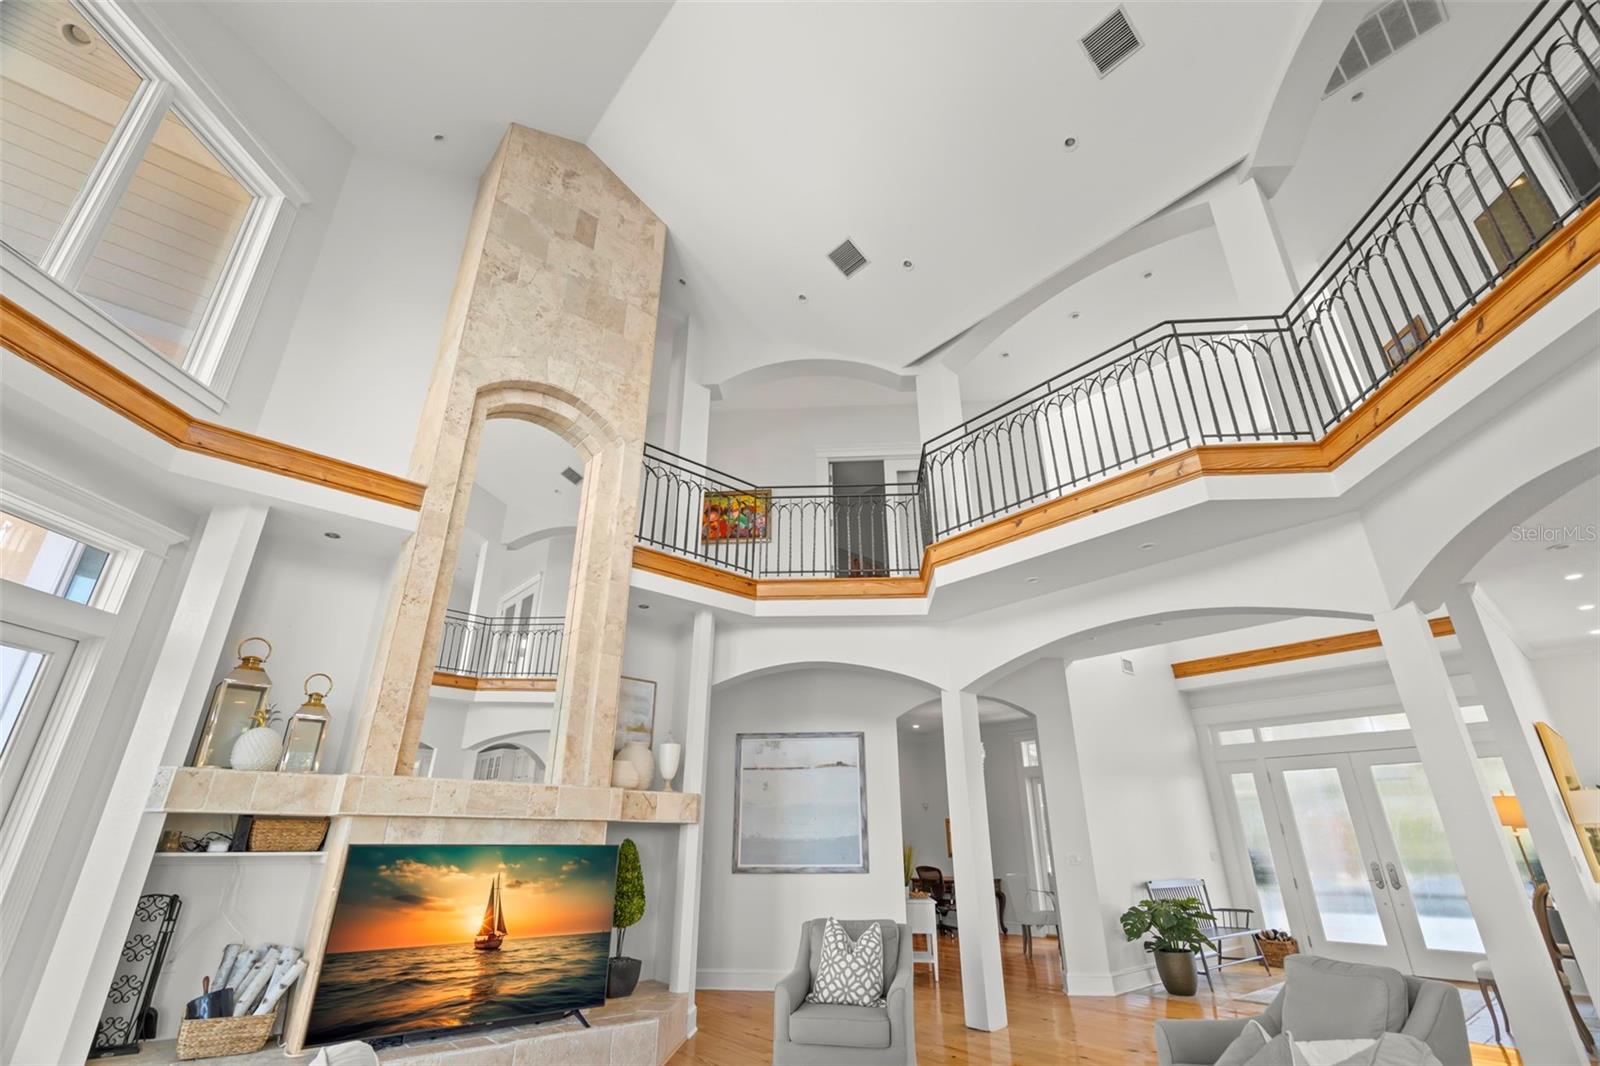 28 foot ceilings in the stunning living area